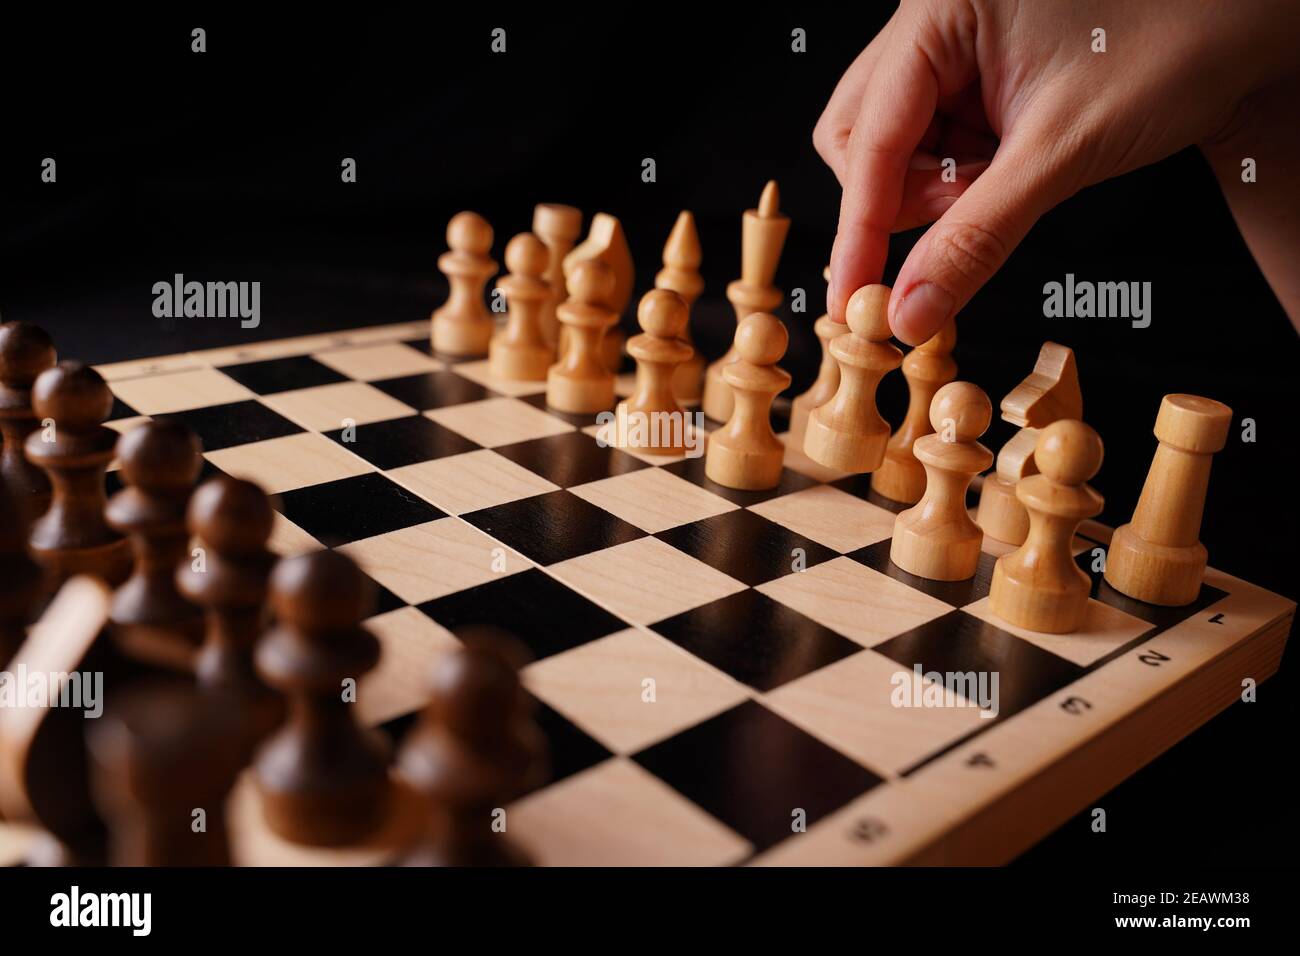 Close up of white and black wooden chess pieces on board. Woman's hand makes first move of white pawn on chessboard. Concept of intelligent, logical a Stock Photo